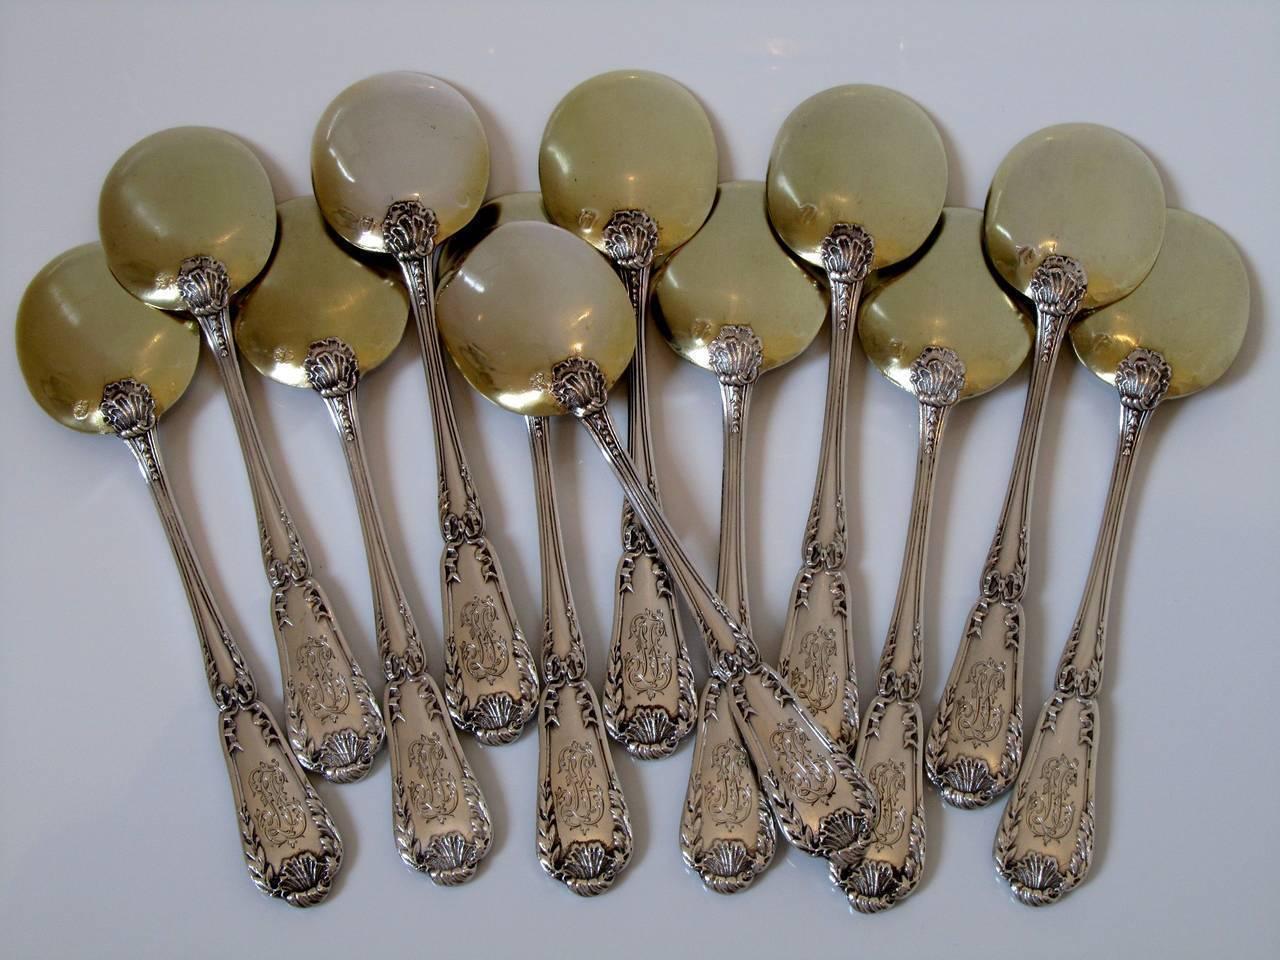 Neoclassical French Sterling Silver 18K Gold Ice Cream Spoons 12-Pieces Set Puiforcat Model